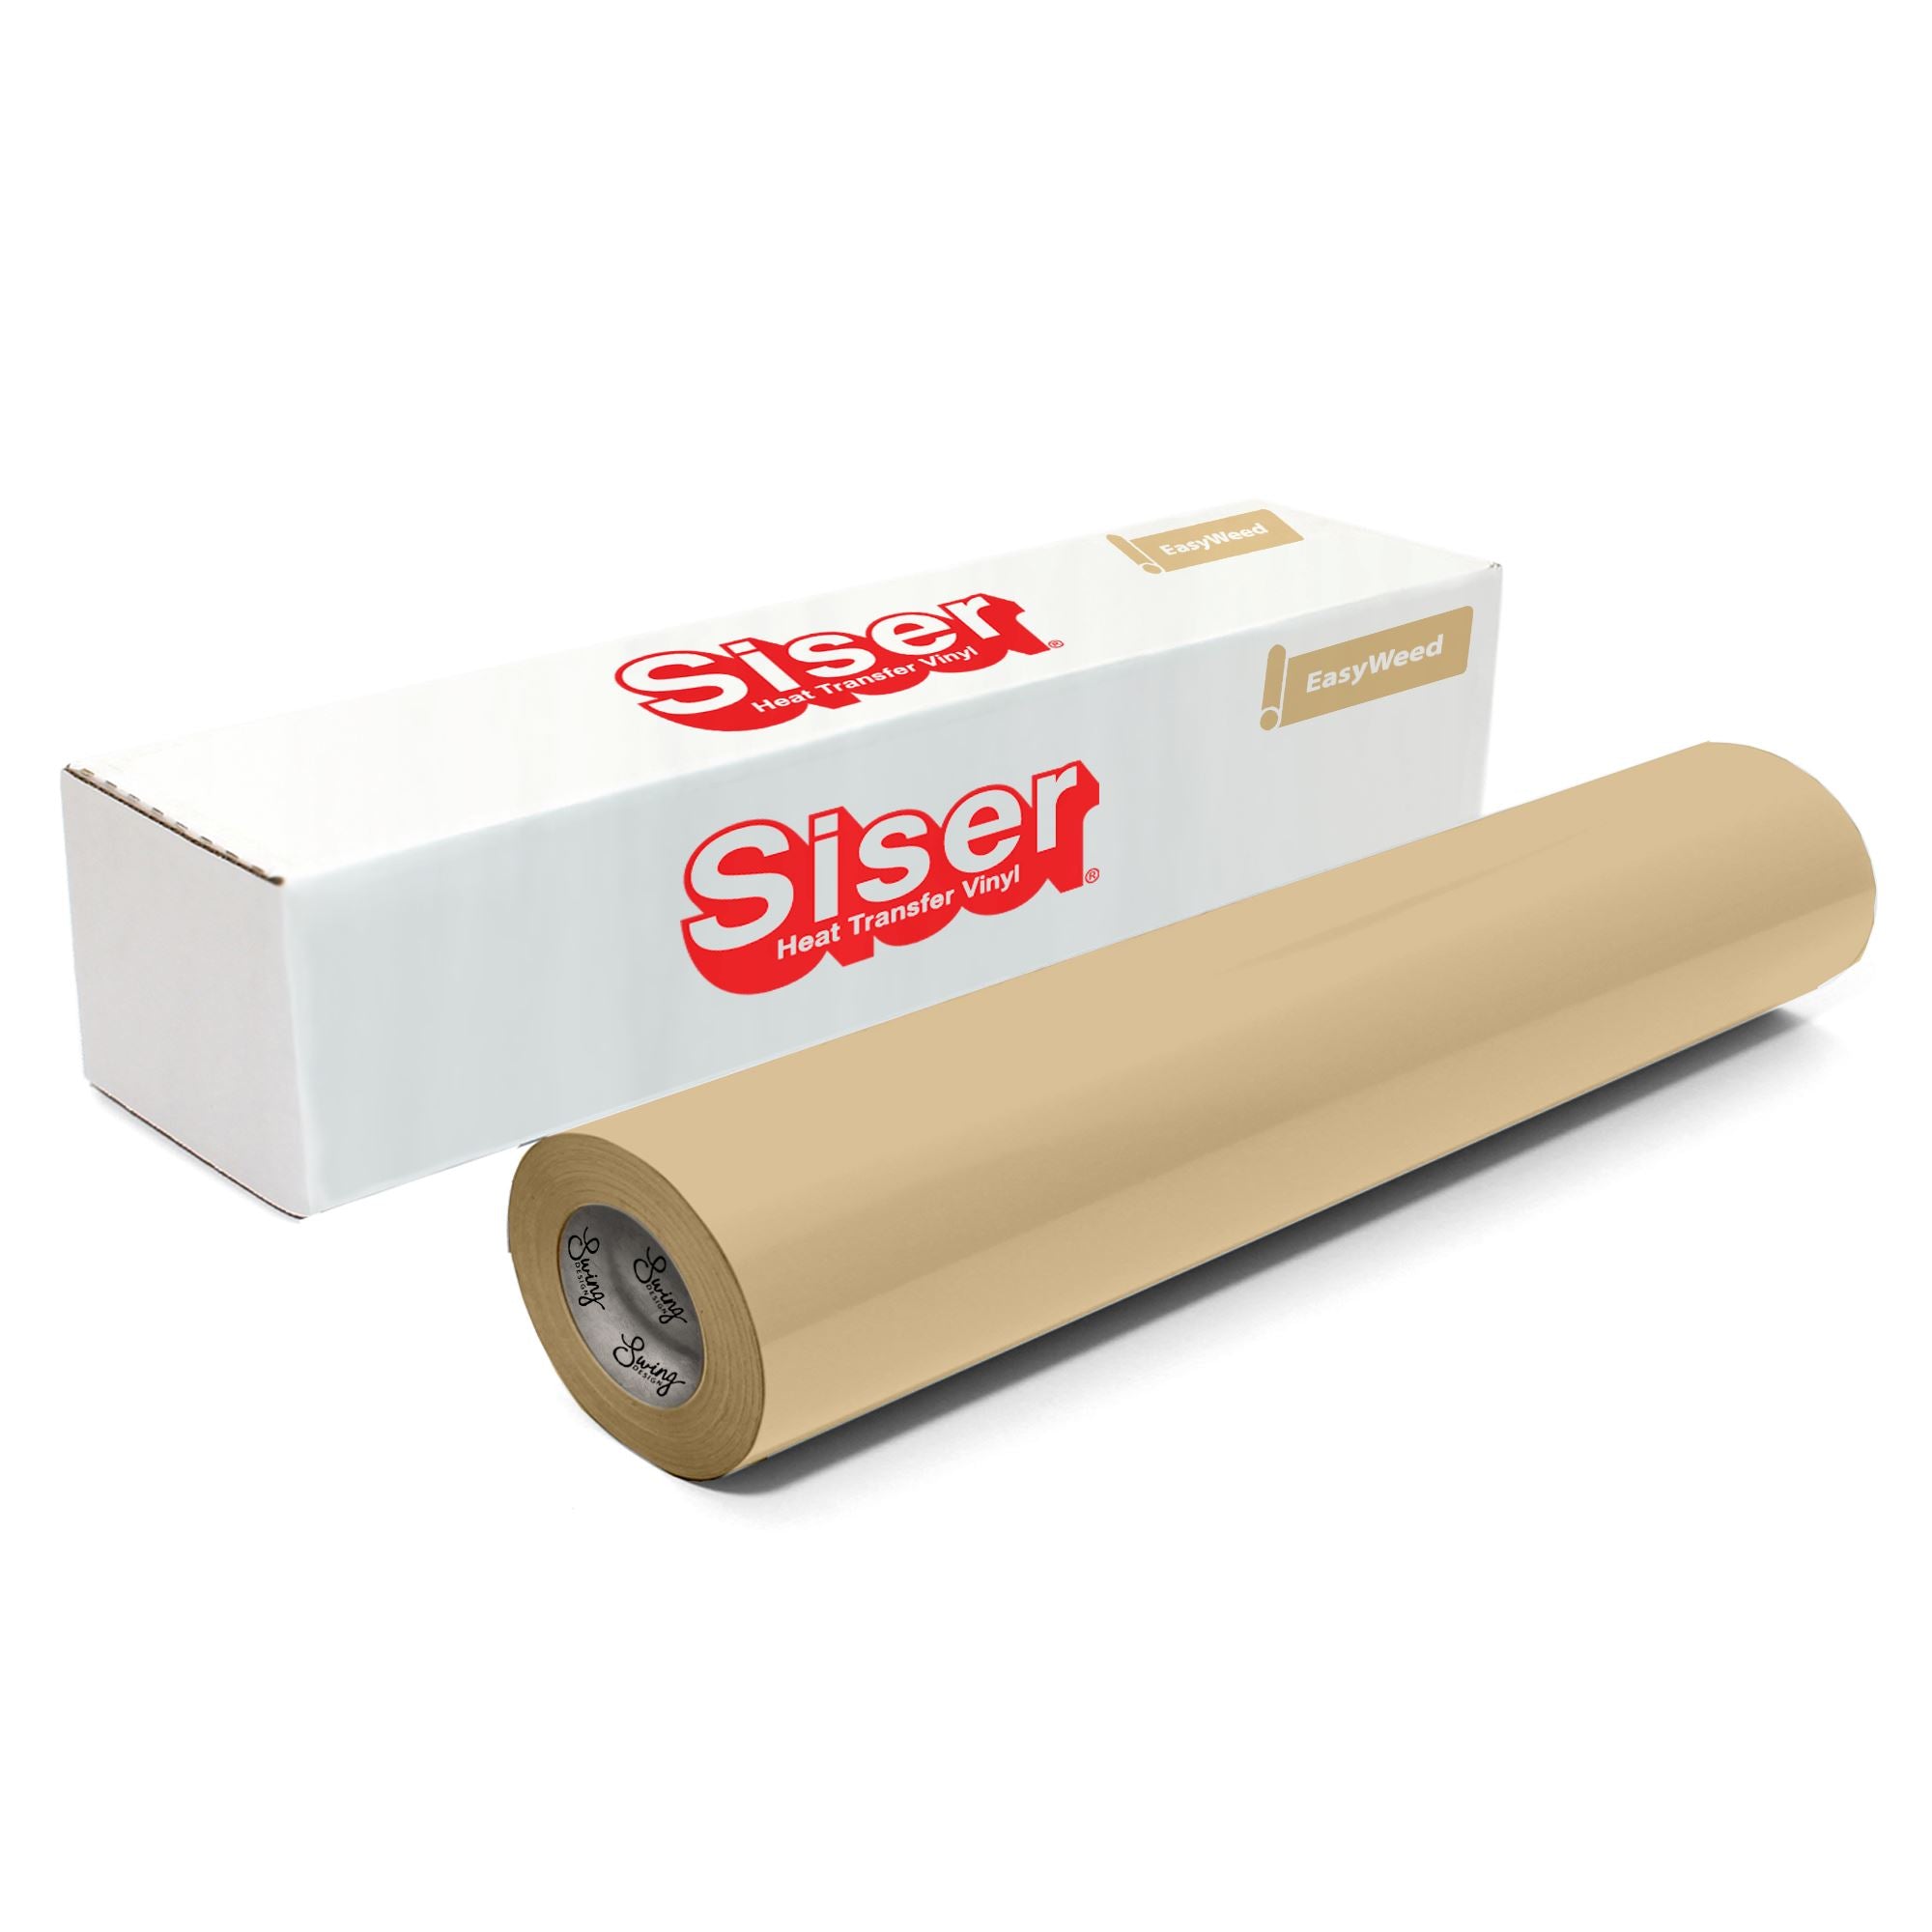 Siser EasyWeed Heat Transfer Vinyl HTV for T-shirts 12 by 3' Roll (Sun Yellow)